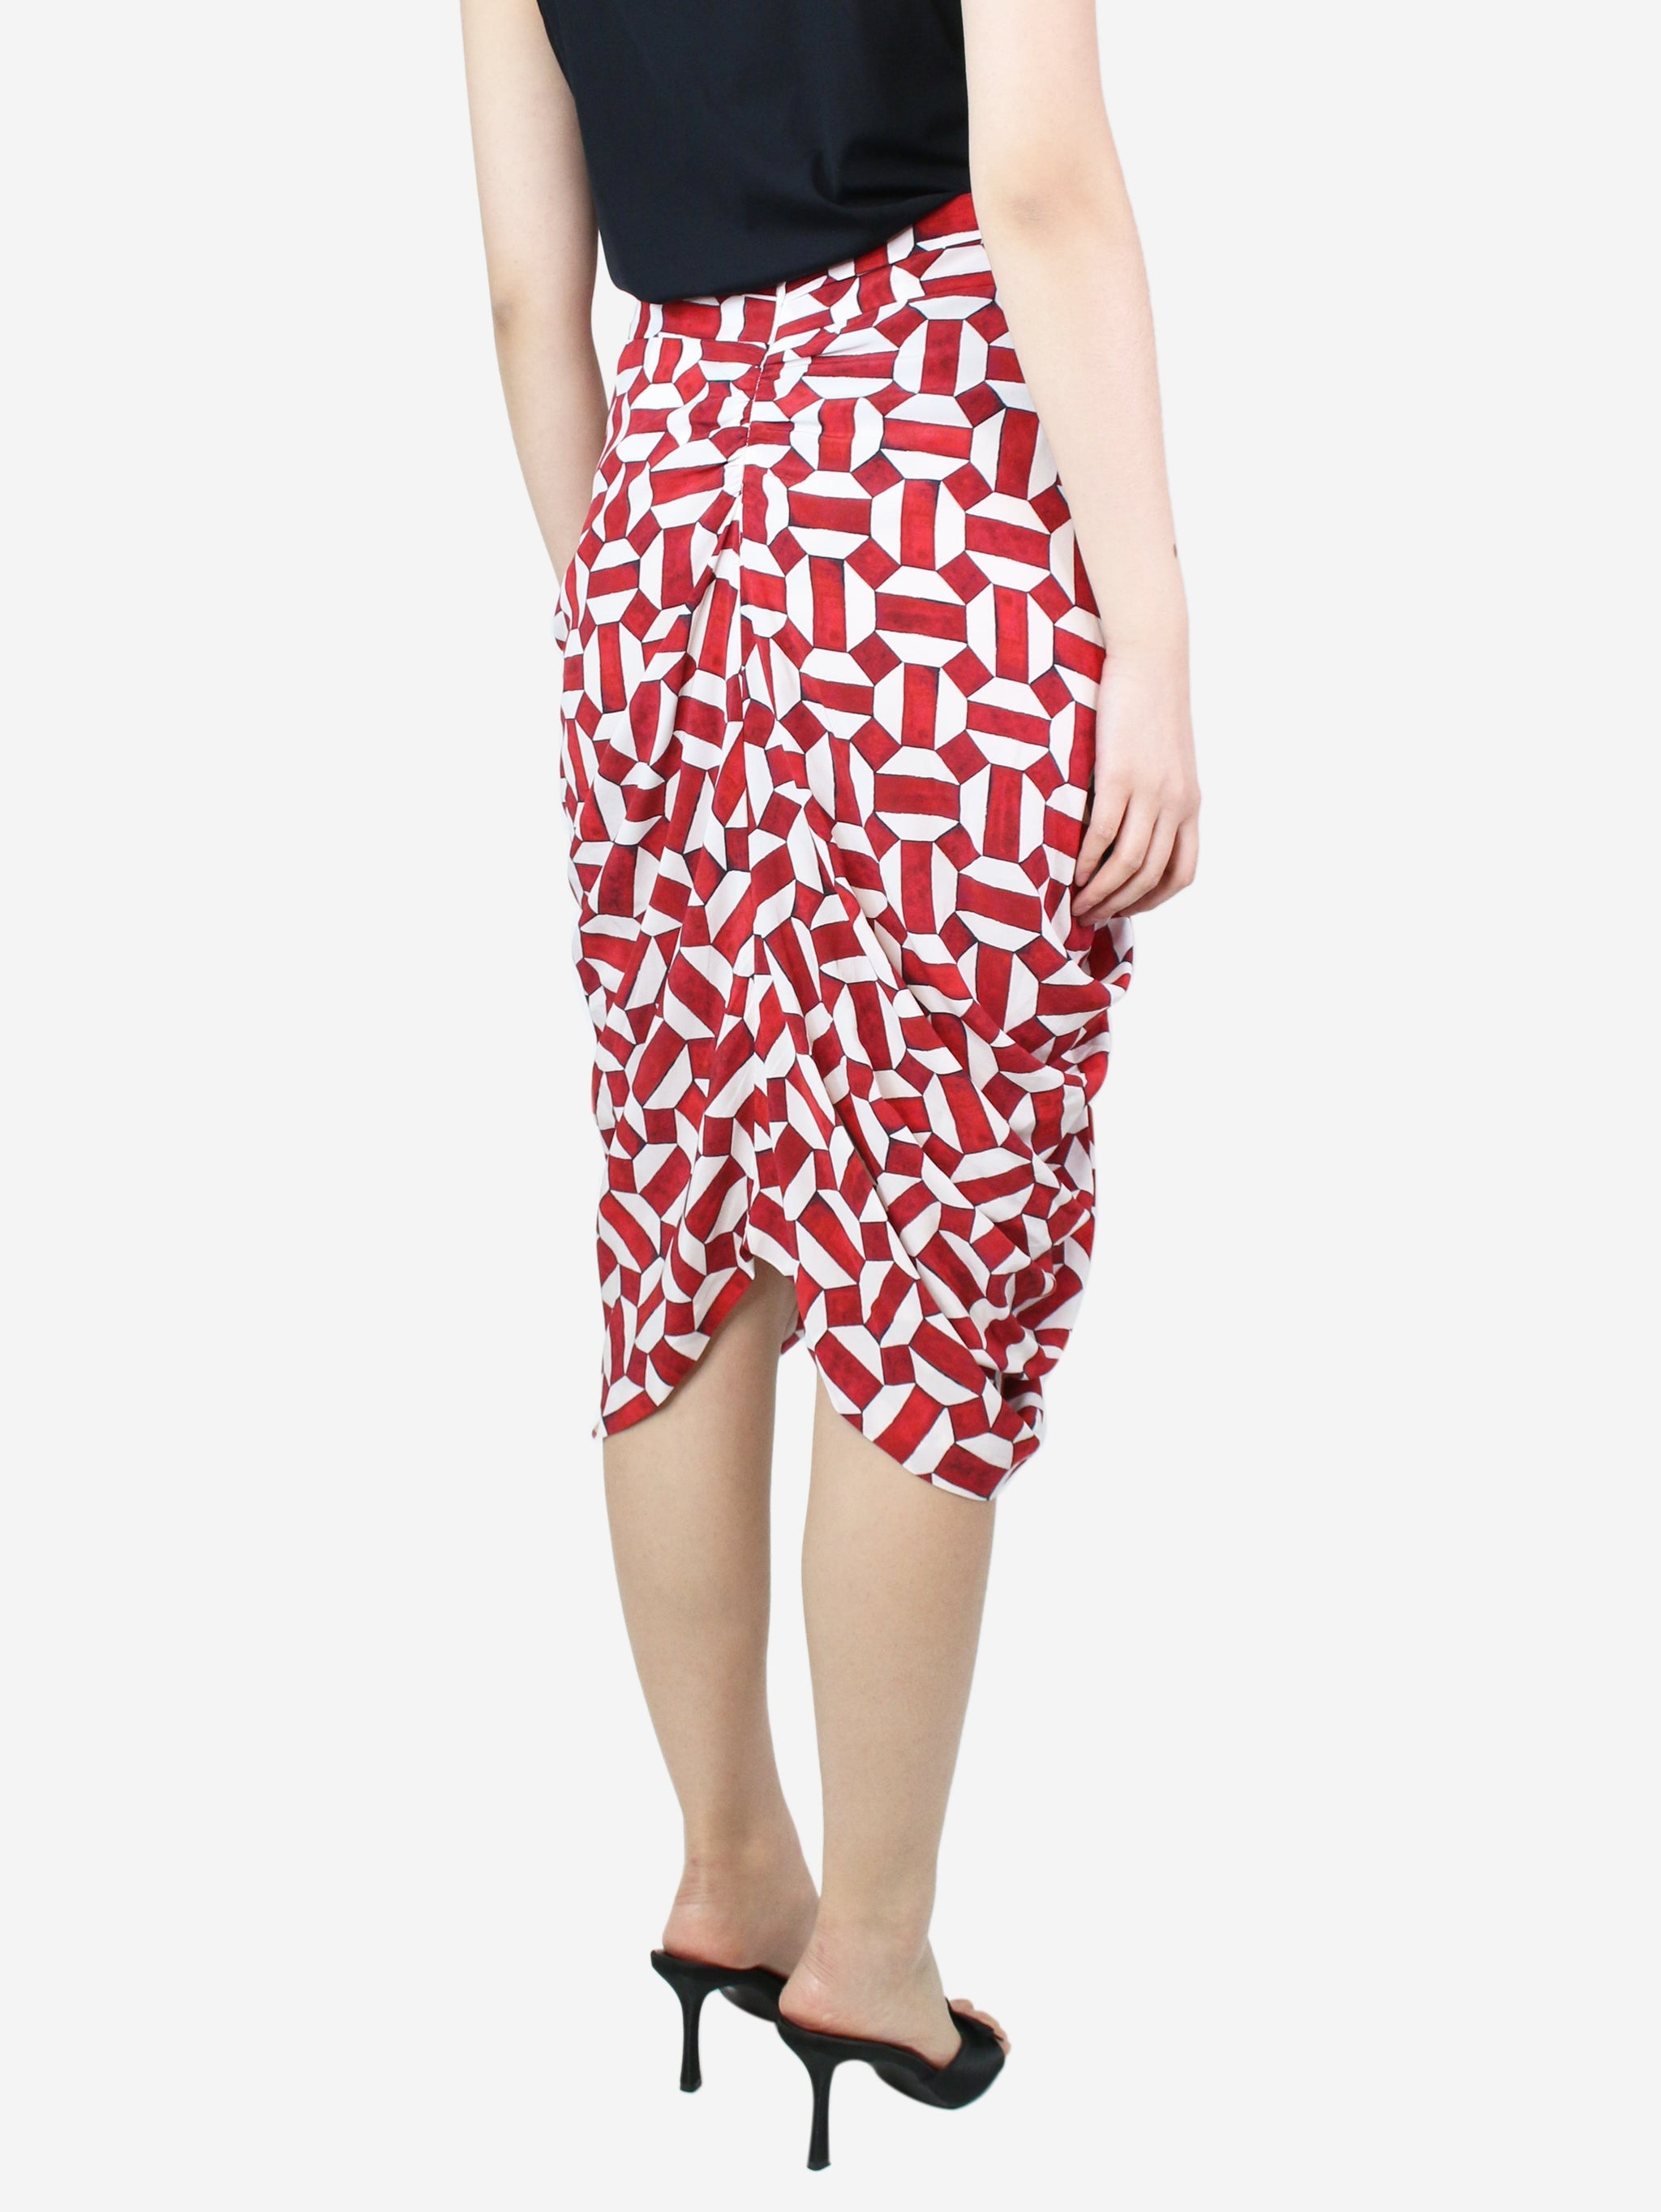 Isabel Marant pre-owned red geometric printed gathered skirt - size UK ...